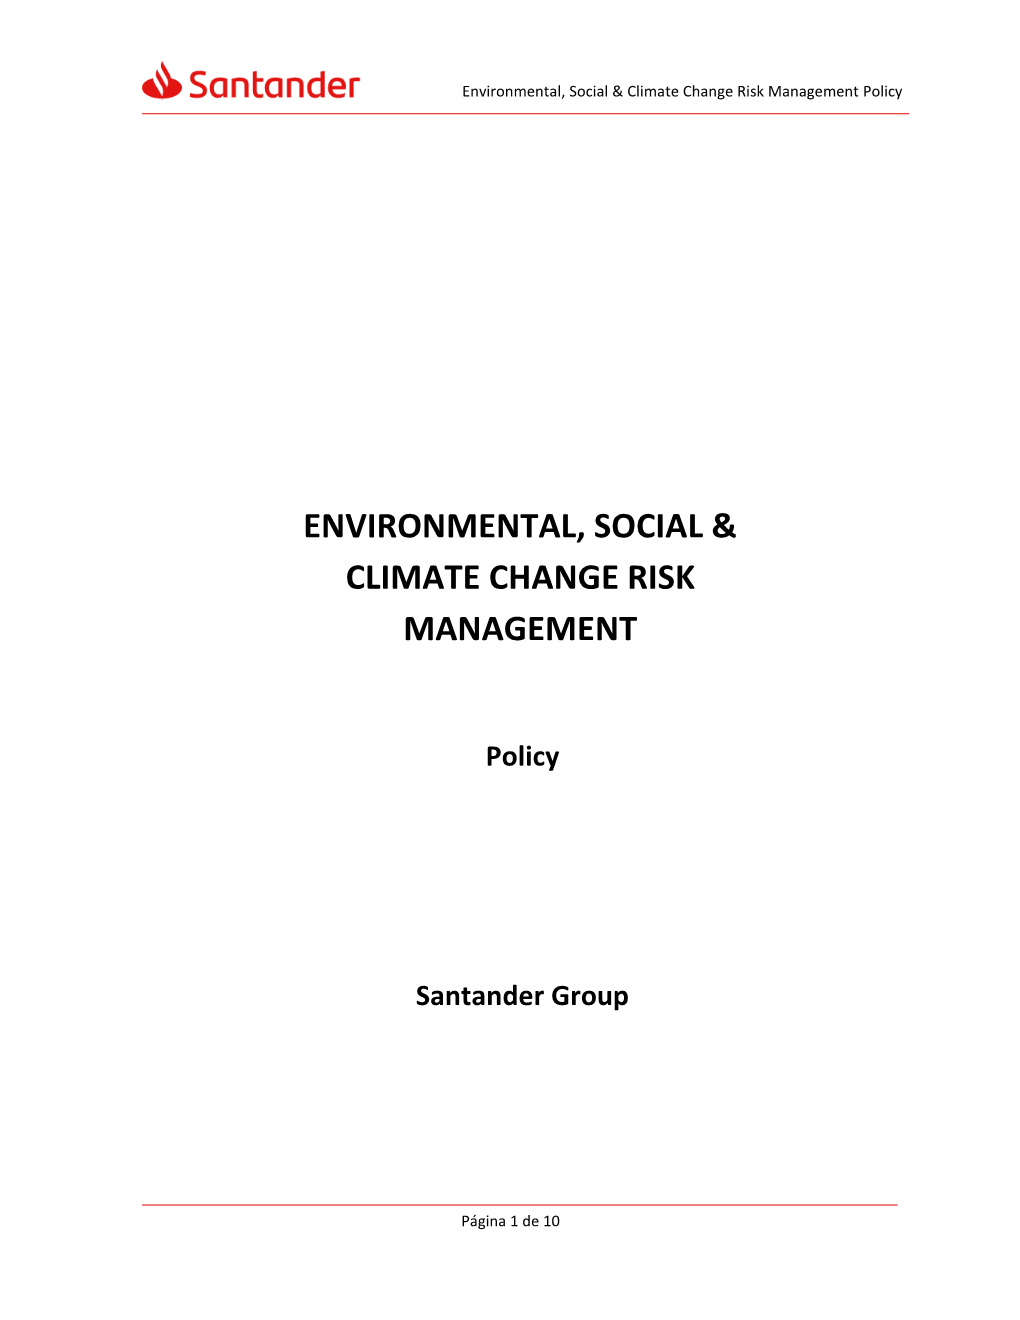 Environmental, Social and Climate Change Risk Policy